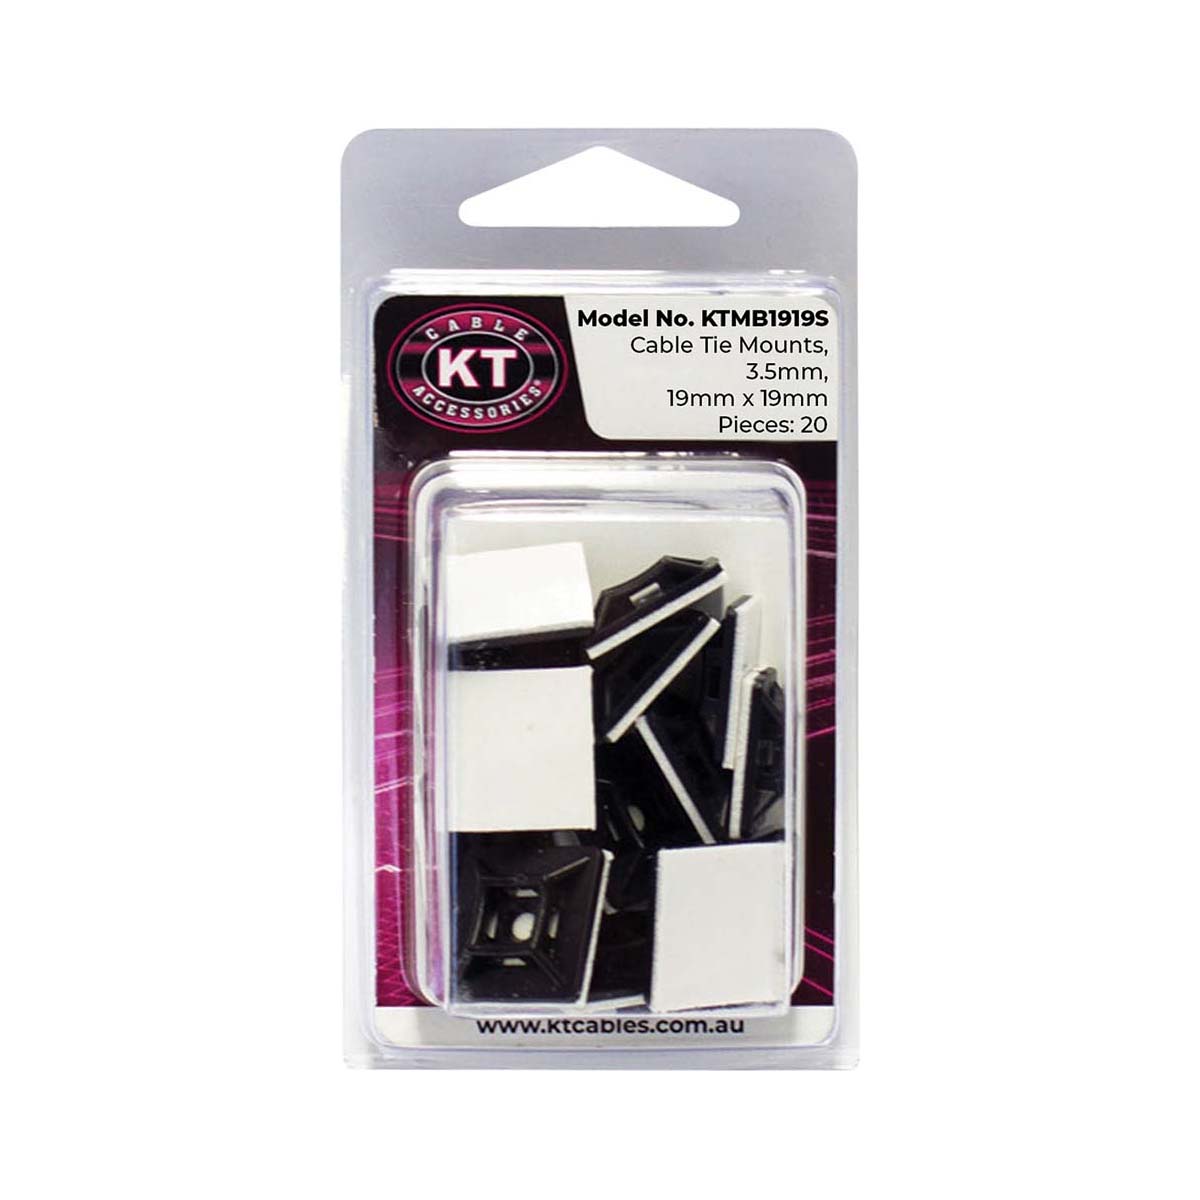 KT Cables Cable Tie Mounts 19mm